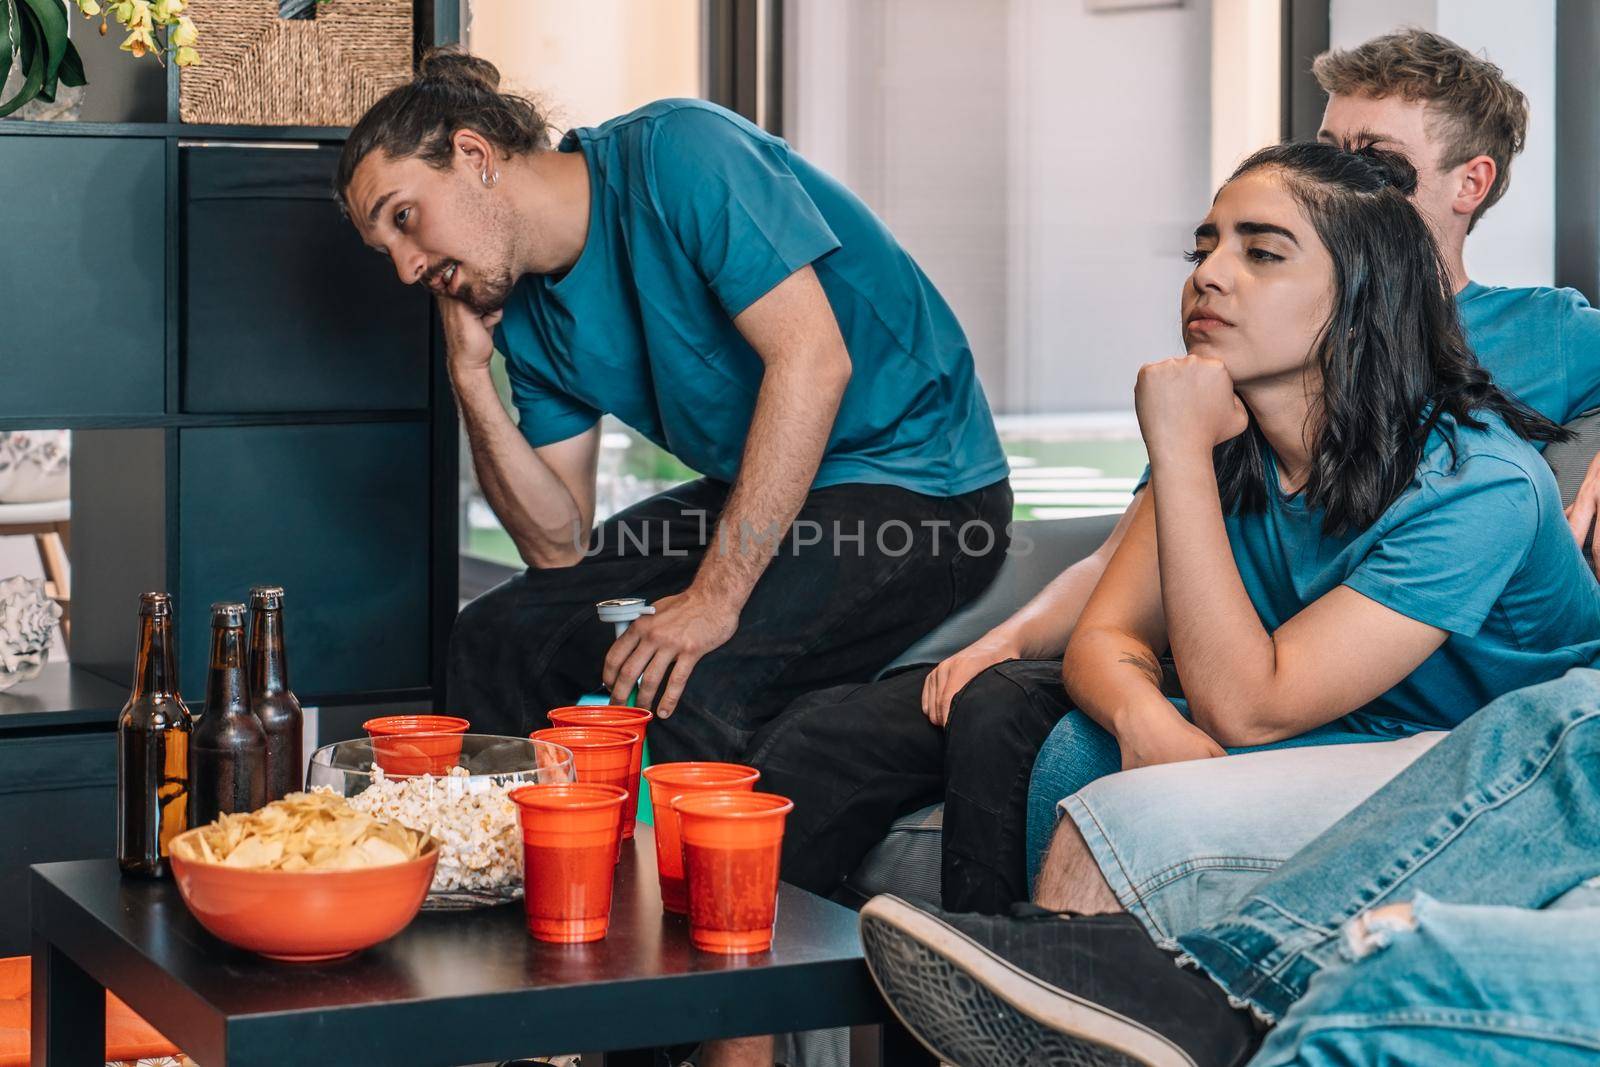 Football fans saddened by their team's defeat. Friends watching football in living room concept of leisure. concept of friendship. group of six people, friendly relationship, divided teams, red and blue, competitive.